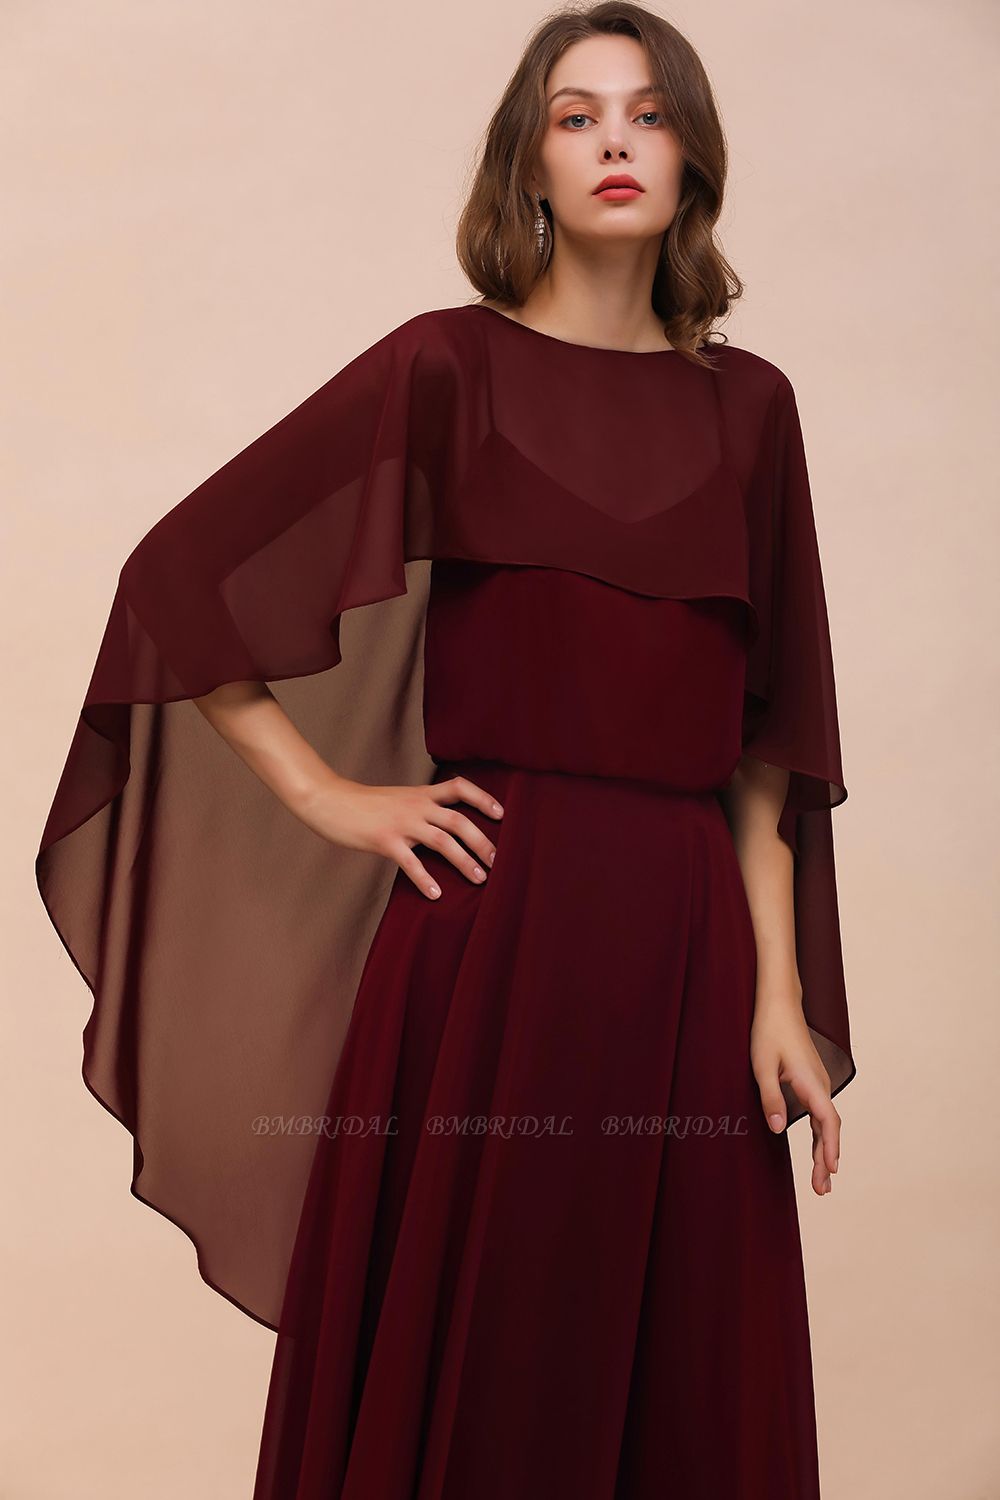 BMbridal Burgundy Chiffon Special Occasions Wrap